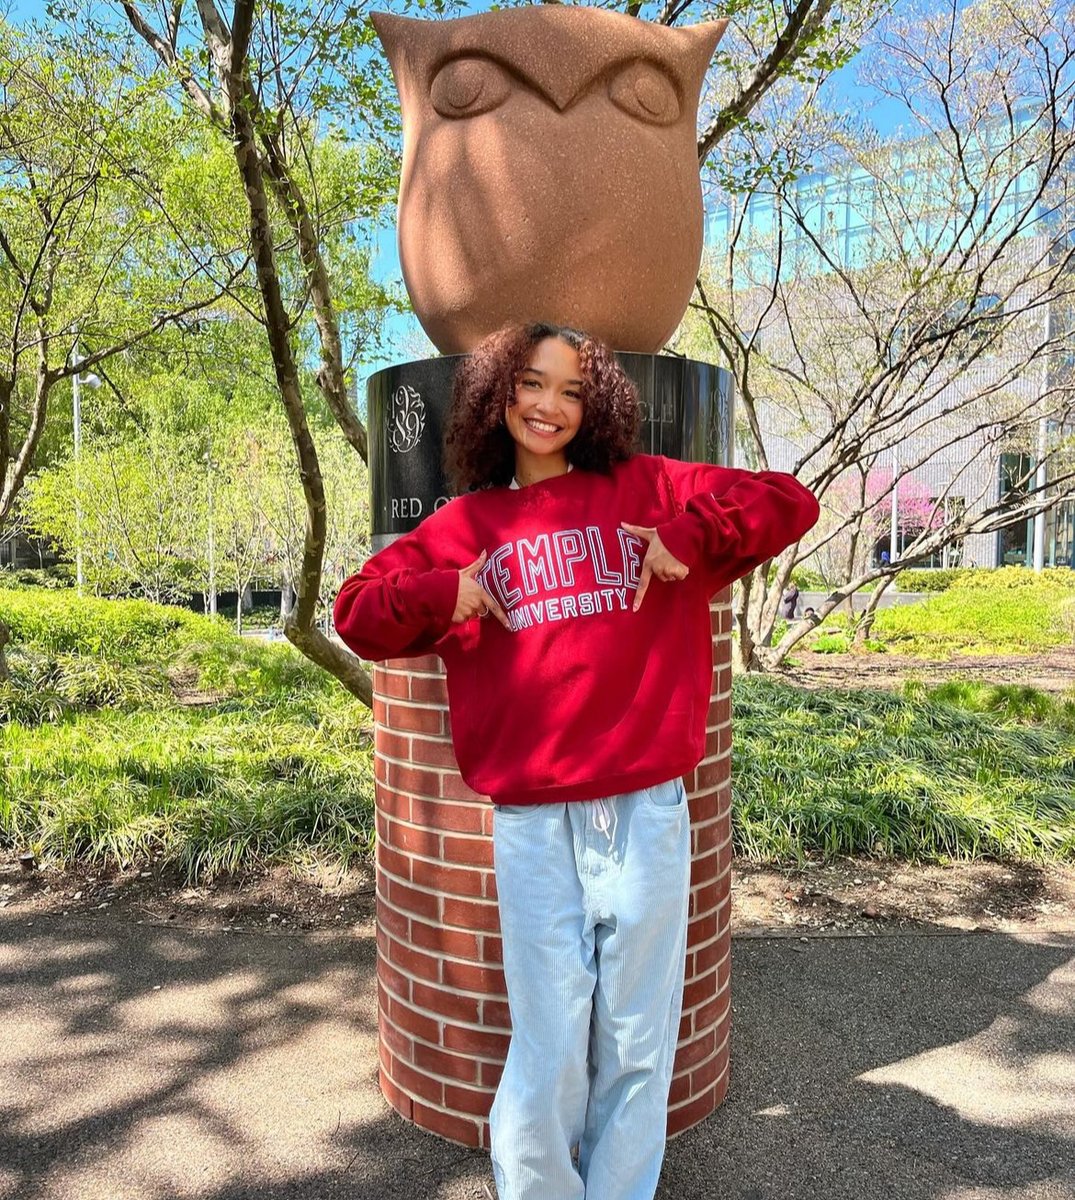 Congratulations to new Owls who are choosing Temple and Philadelphia! Your college years will be a time of growth, learning and new experiences. Welcome to the Nest 🦉🍒 The extended deposit deadline is now May 15, there's still time to become Owl-ficial.